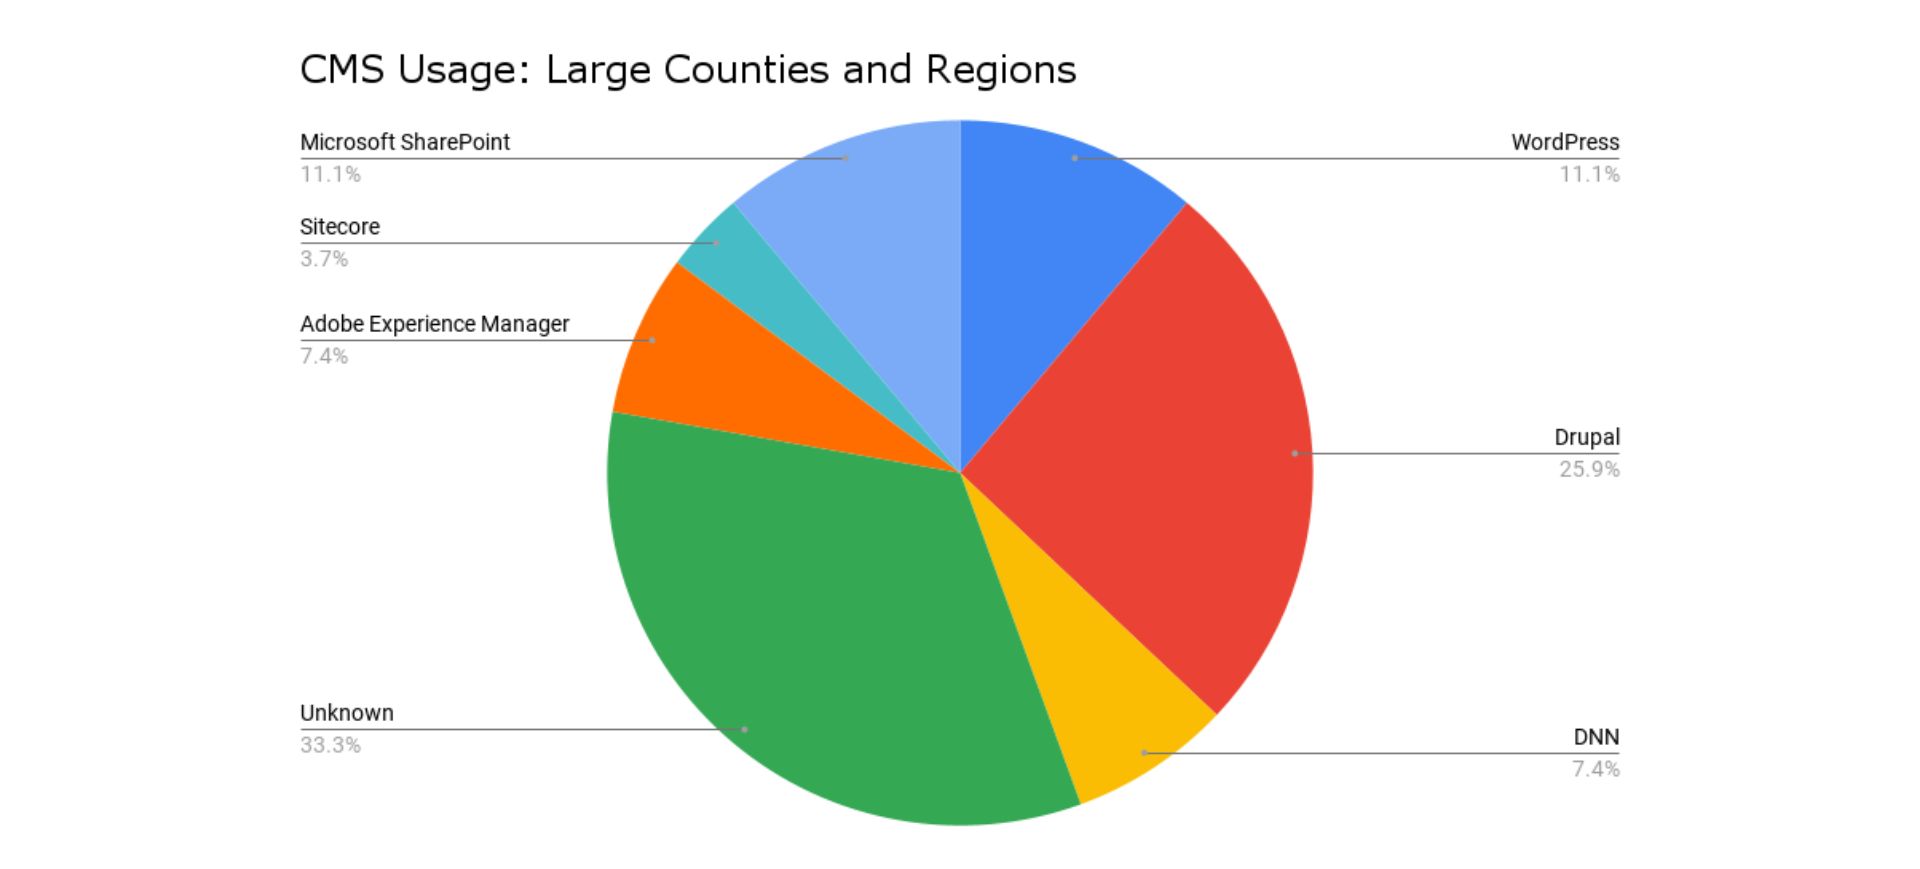 cms usage: large counties